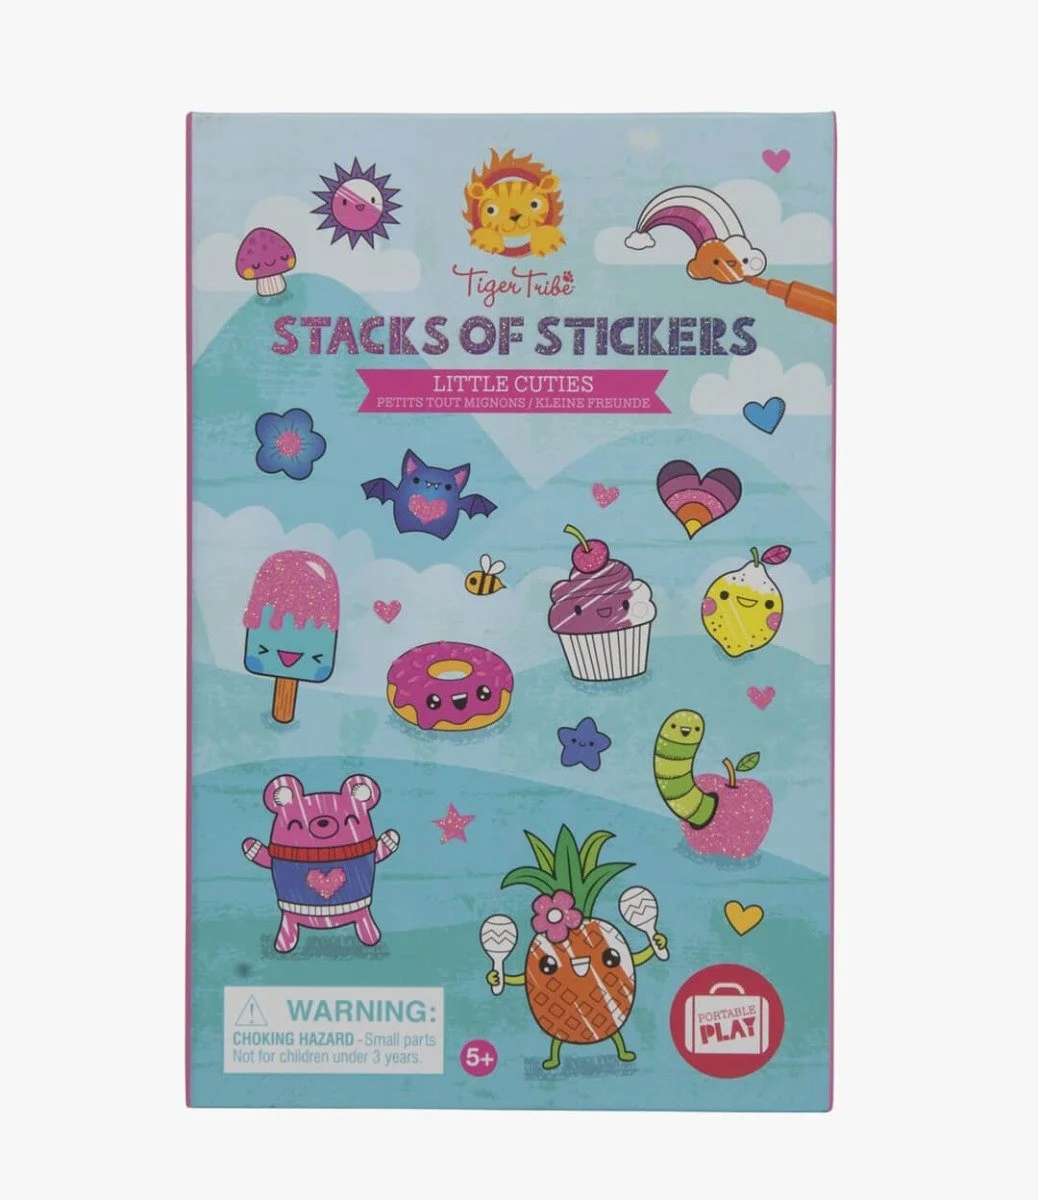 Stacks of Stickers - Little Cuties by Tiger Tribe